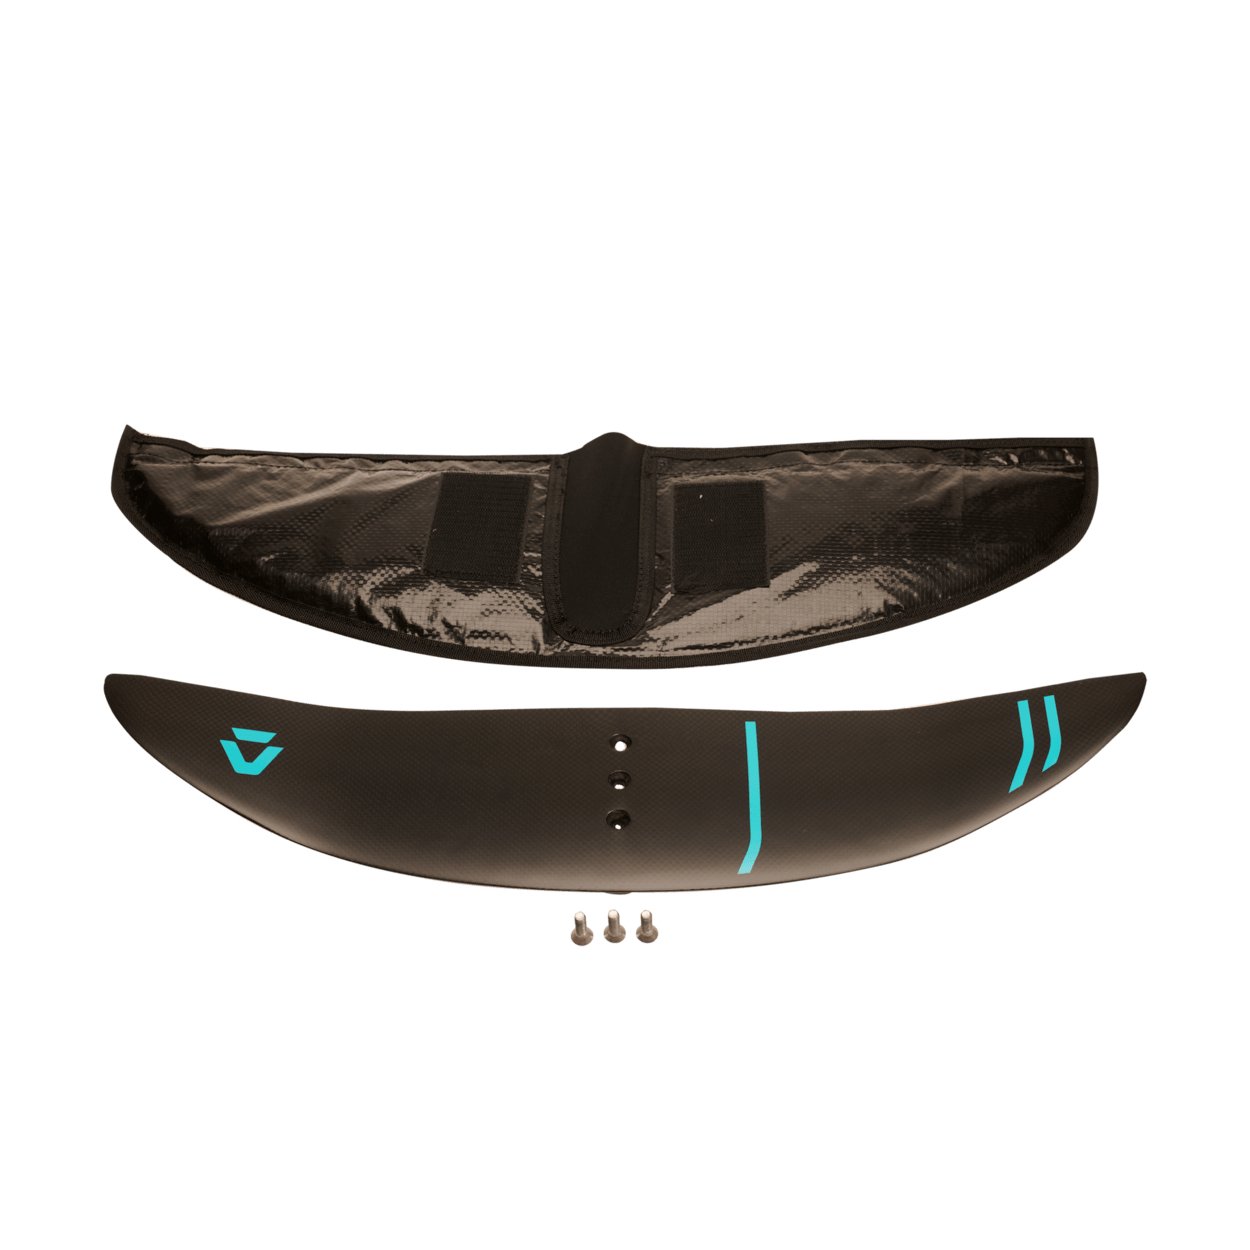 Duotone Spirit GT Front Wing 565 Carbon (SS19-SS22) 2022 - Worthing Watersports - 9008415890156 - Spareparts - Duotone Kiteboarding